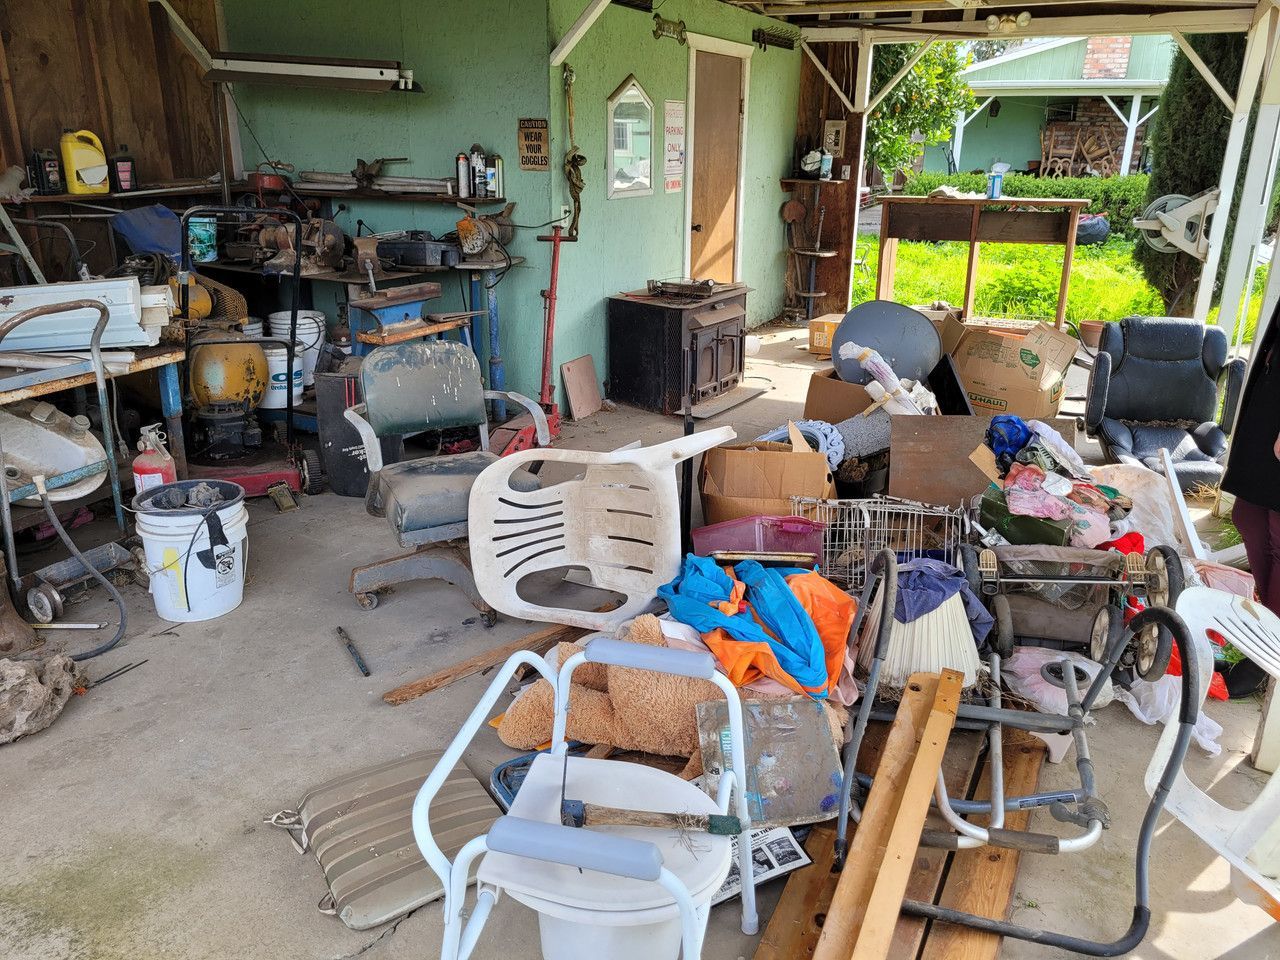 Backyard filled with a chaotic pile of discarded items including lawn chairs, a bed pan, worn-out clothing, stuffed animals, rusty tools, and broken lawn equipment, showcasing the aftermath of an eviction.